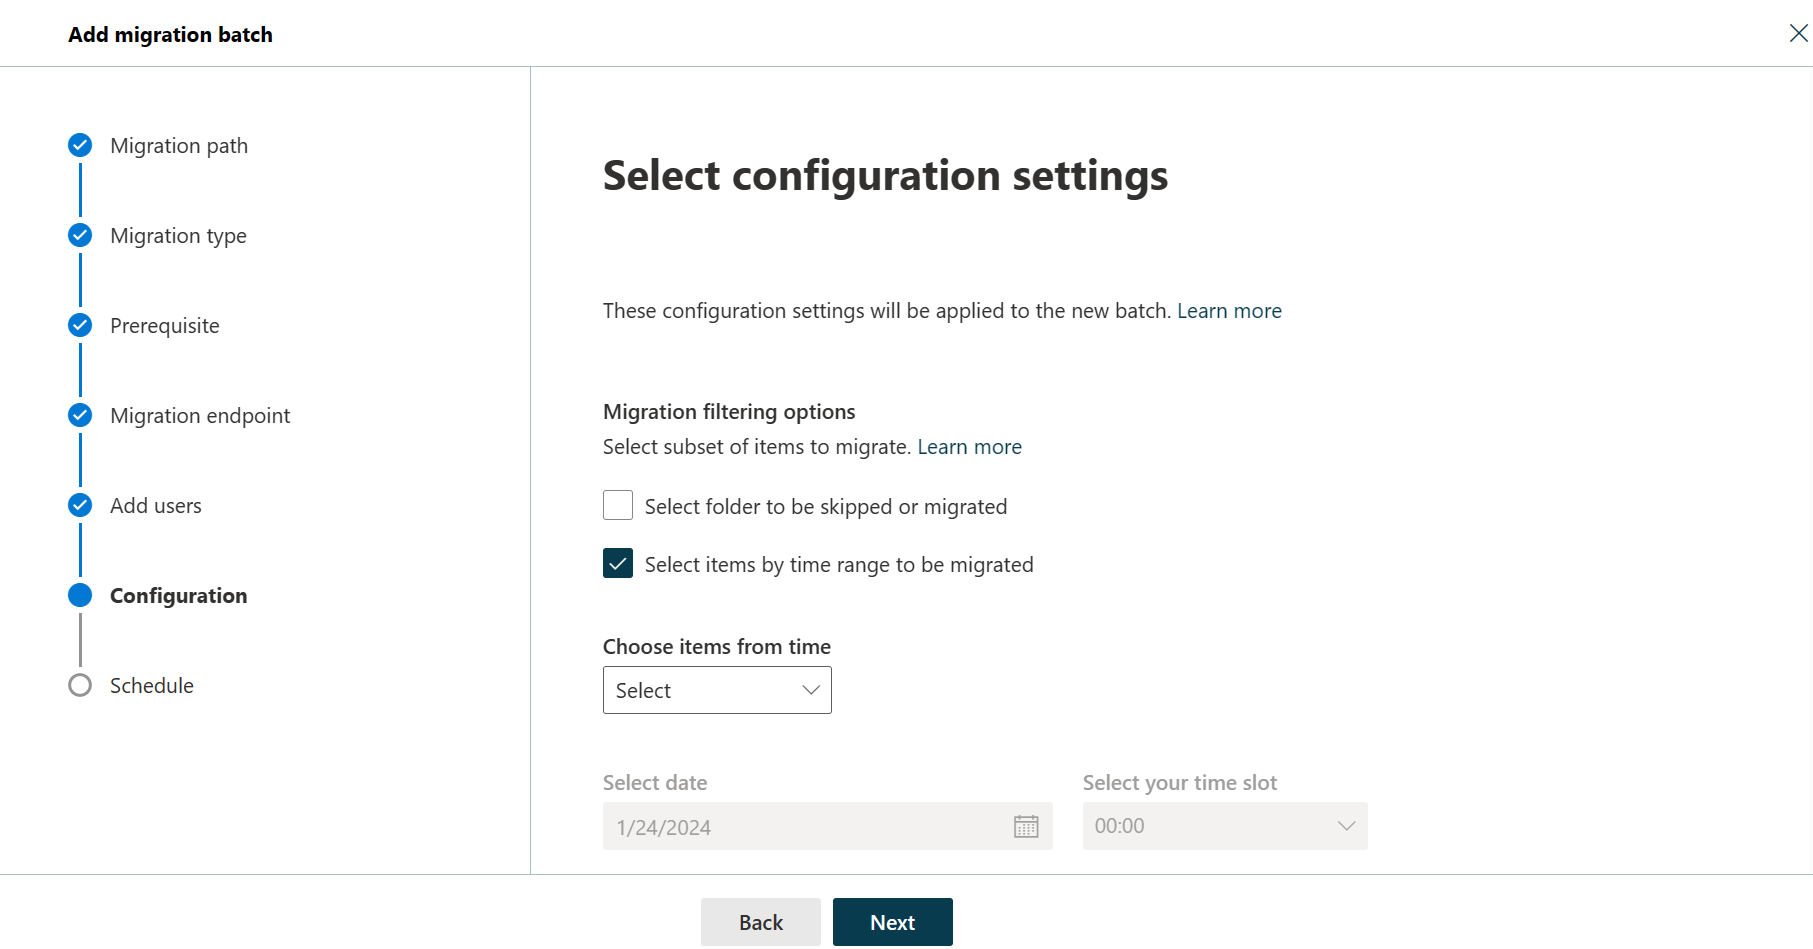 Screenshot of the sixth step of the Add migration batch wizard showing filtering options.